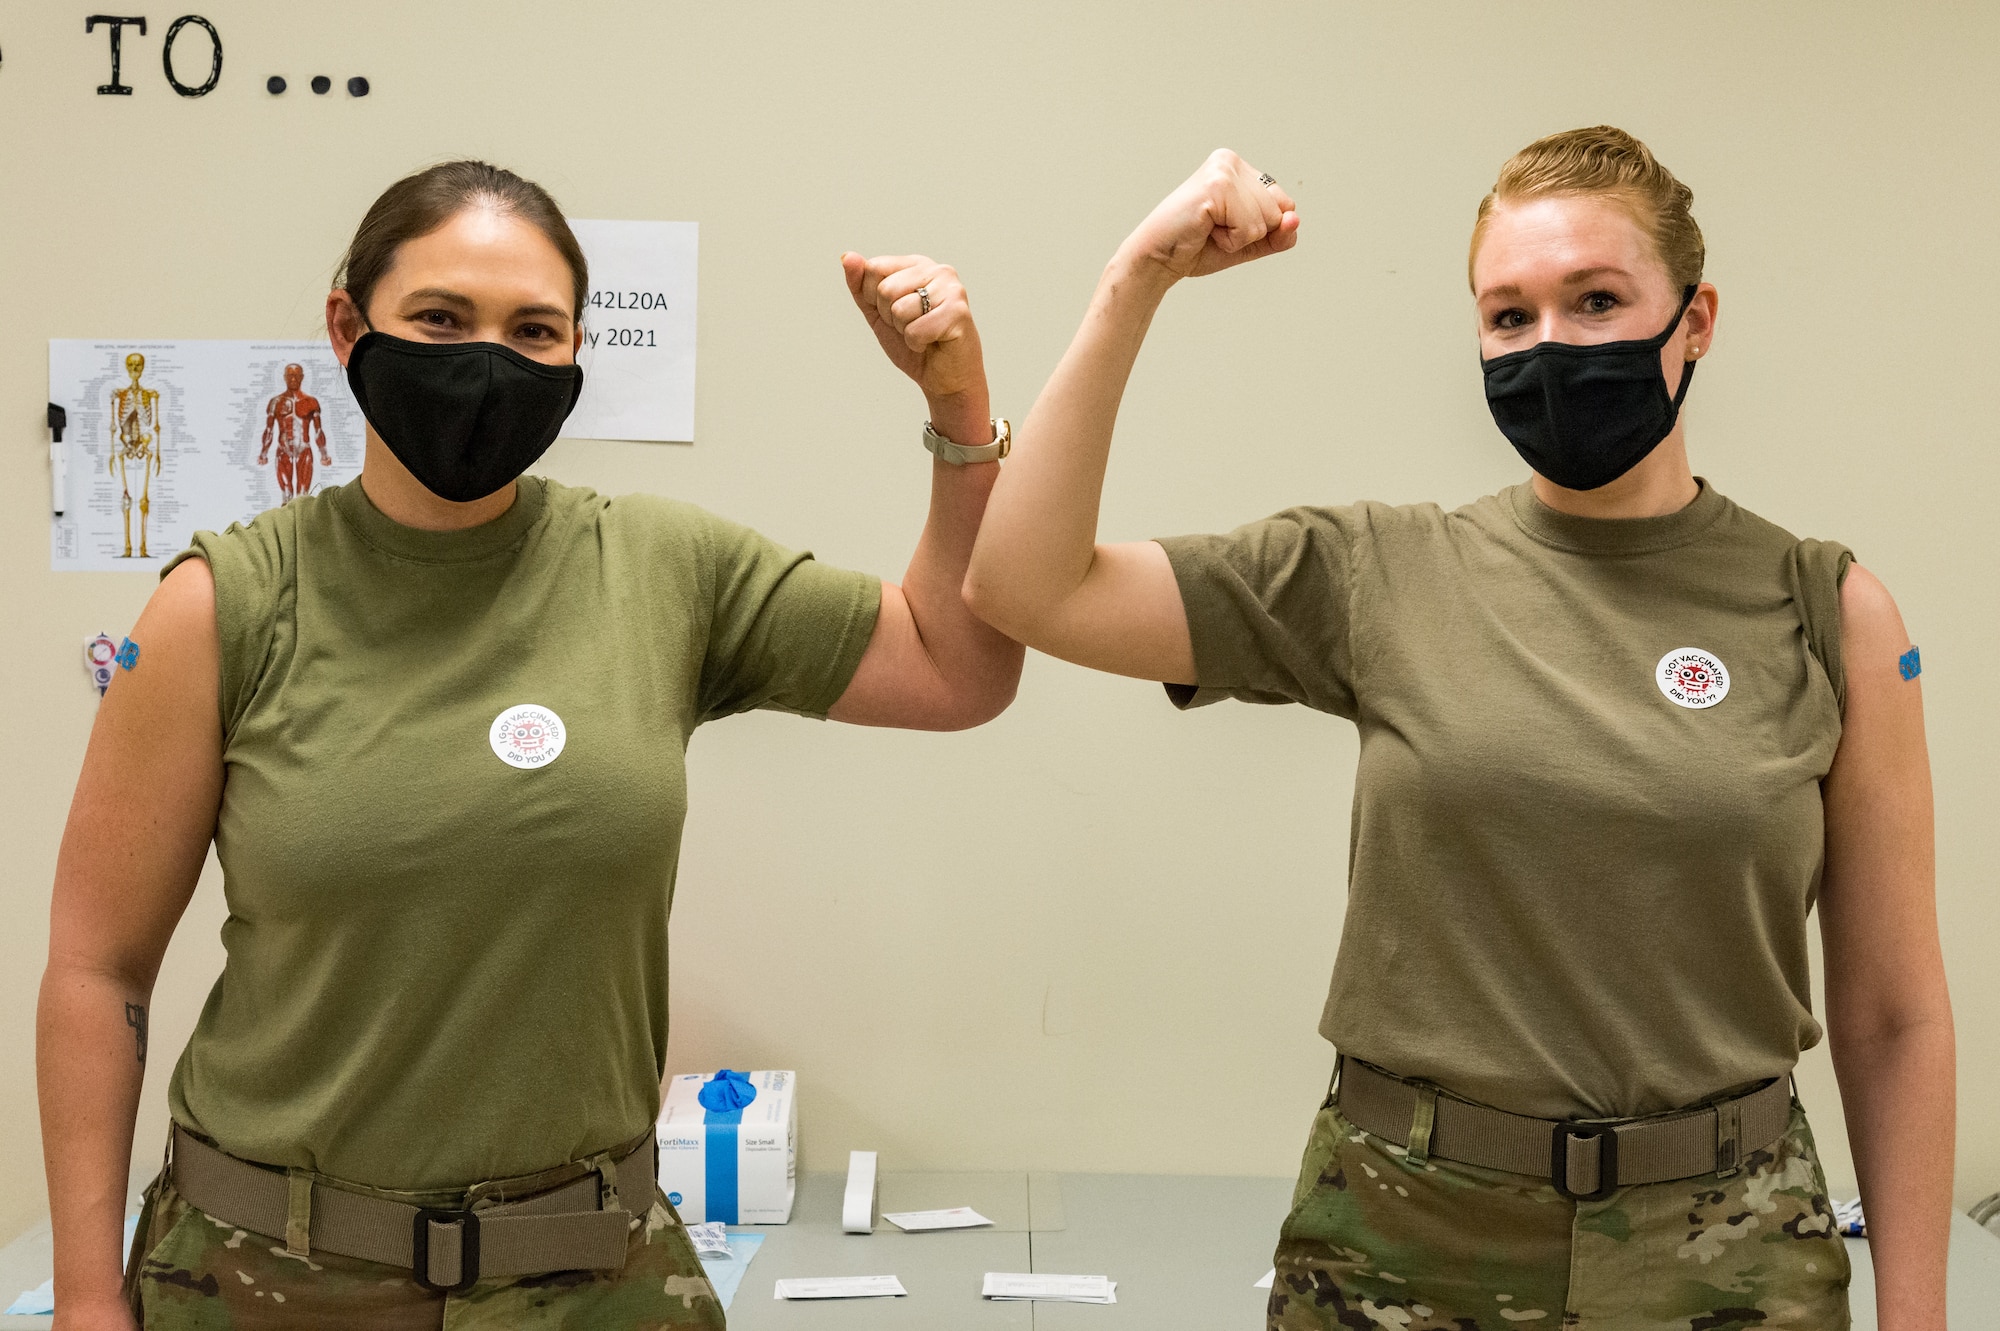 Lt. Col. Kristen Carter, 436th Medical Support Squadron commander, and Master Sgt. Jessica Nienhueser, 436th MDSS superintendent, pose for a photo after receiving the COVID-19 vaccination Jan. 21, 2021, at Dover Air Force Base, Delaware. Carter and Nienhueser were among the first Team Dover front-line workers who voluntarily received the vaccine in concurrence with Department of Defense guidance. The vaccine was granted emergency use authorization by the U.S. Food and Drug Administration for use in prevention of COVID-19. (U.S. Air Force photo by Roland Balik)